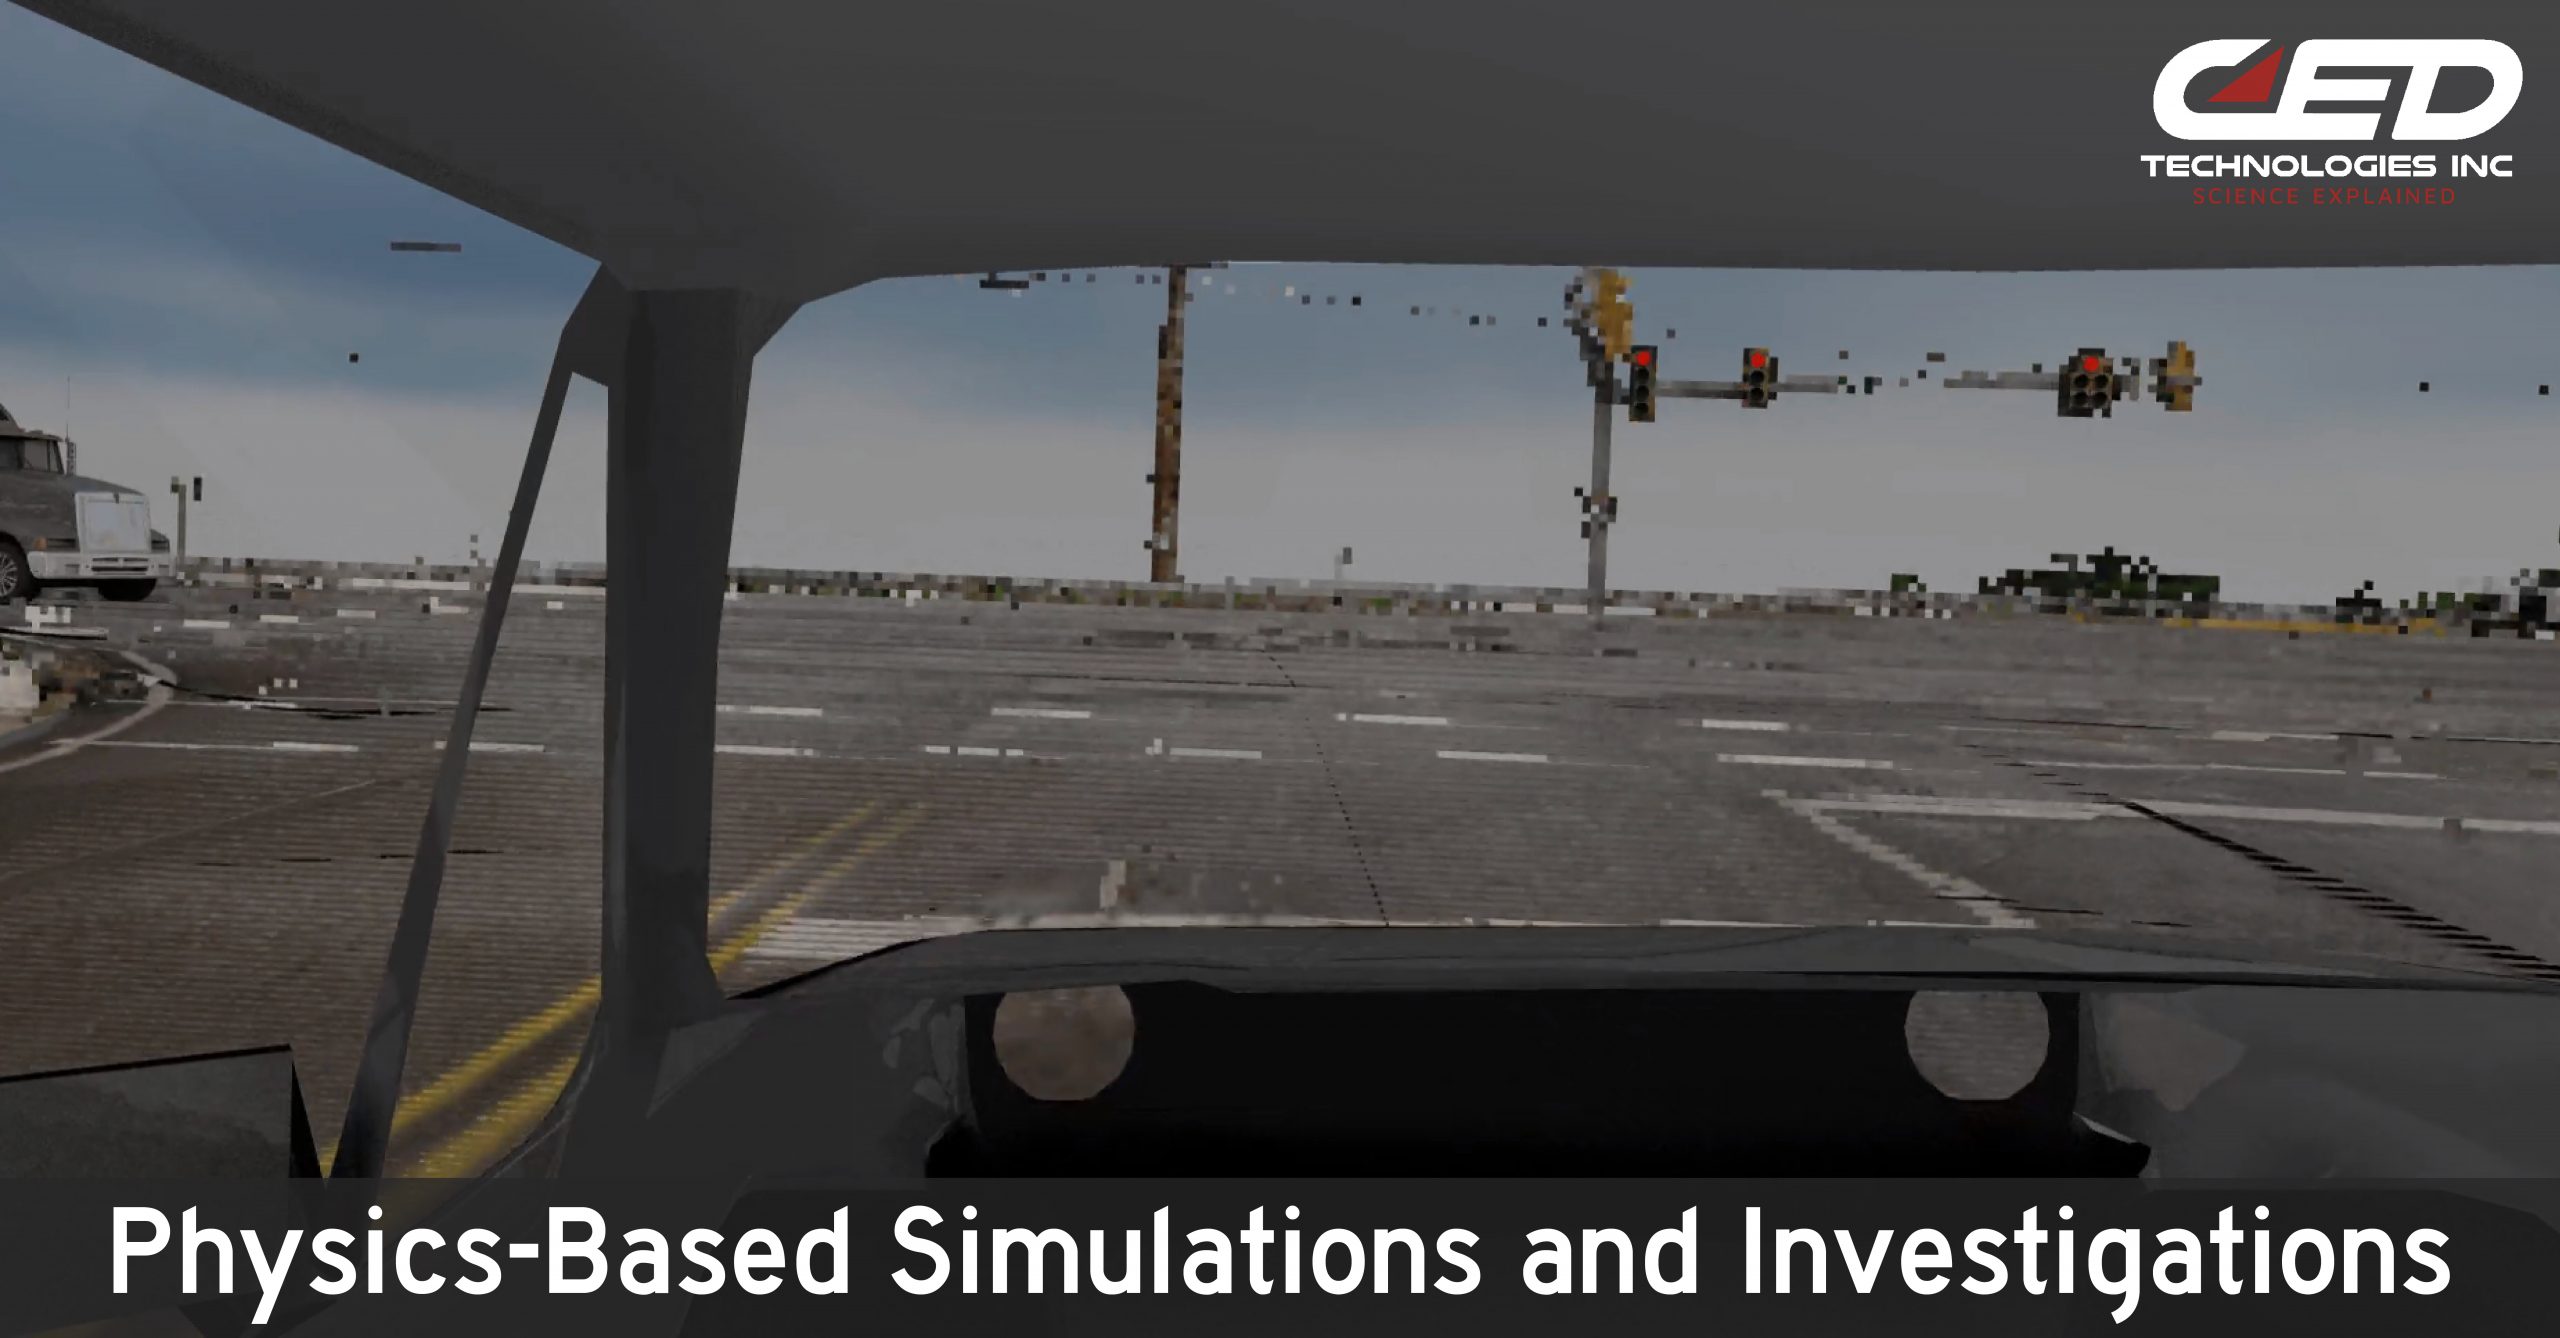 Using Physic-Based Simulations in Vehicle Crash Investigations